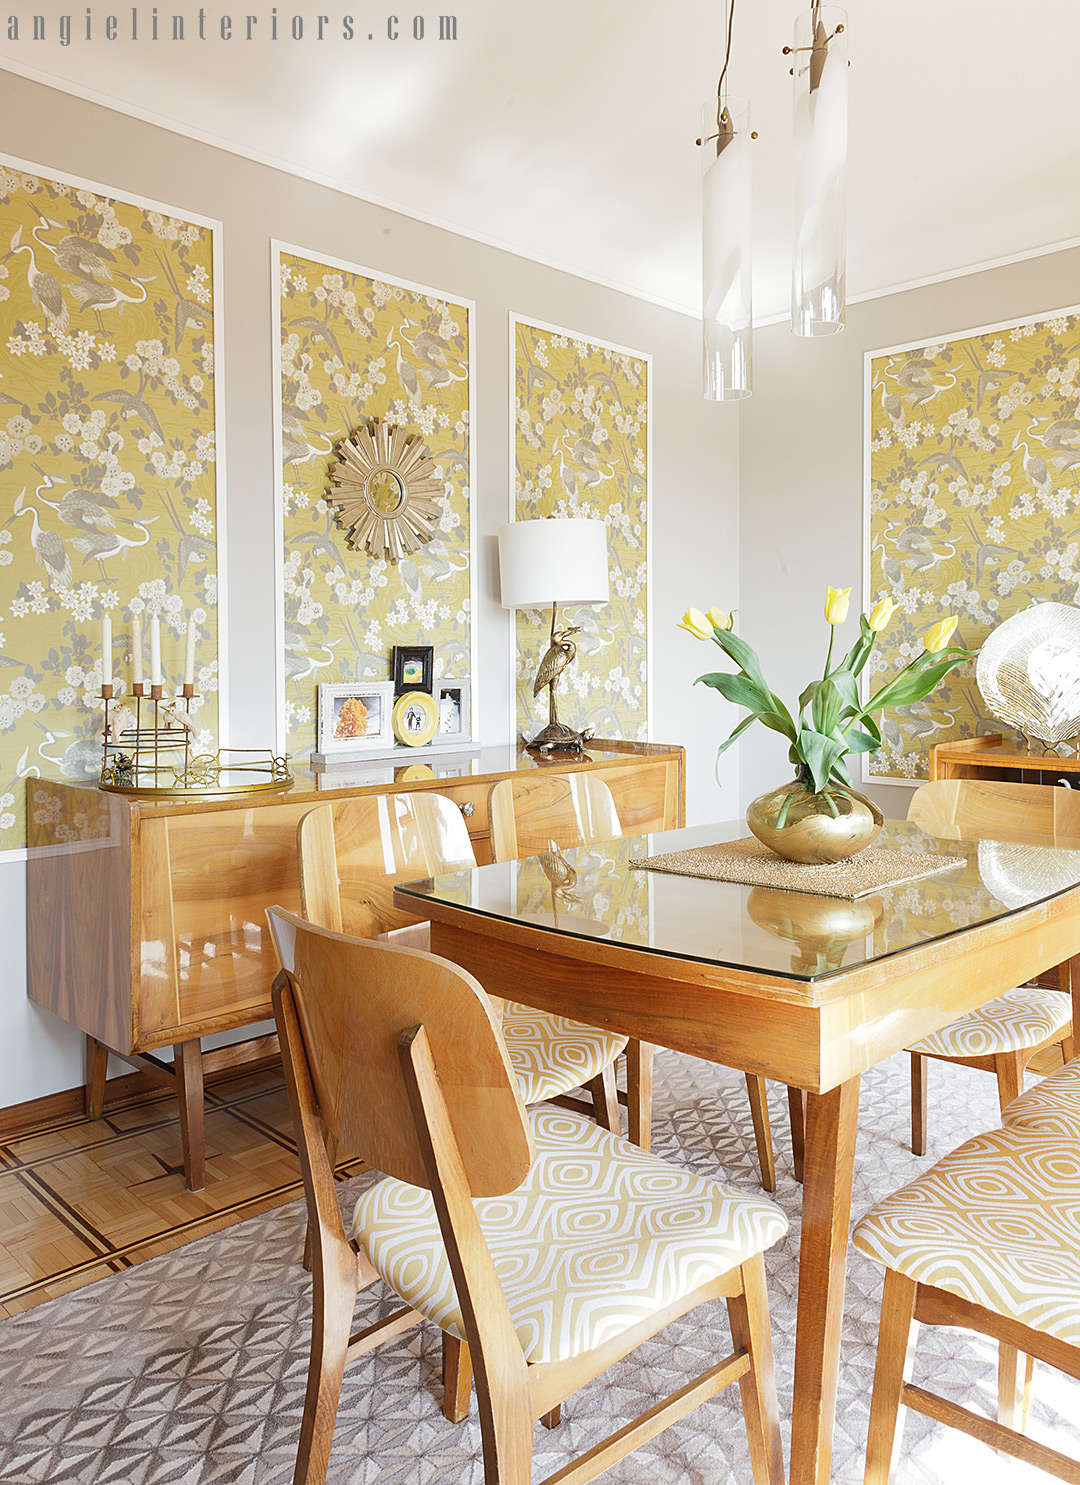 GR&J Baker Heron wallpaper in yellow and grey dining room with Mid-century modern dining set and brass accents